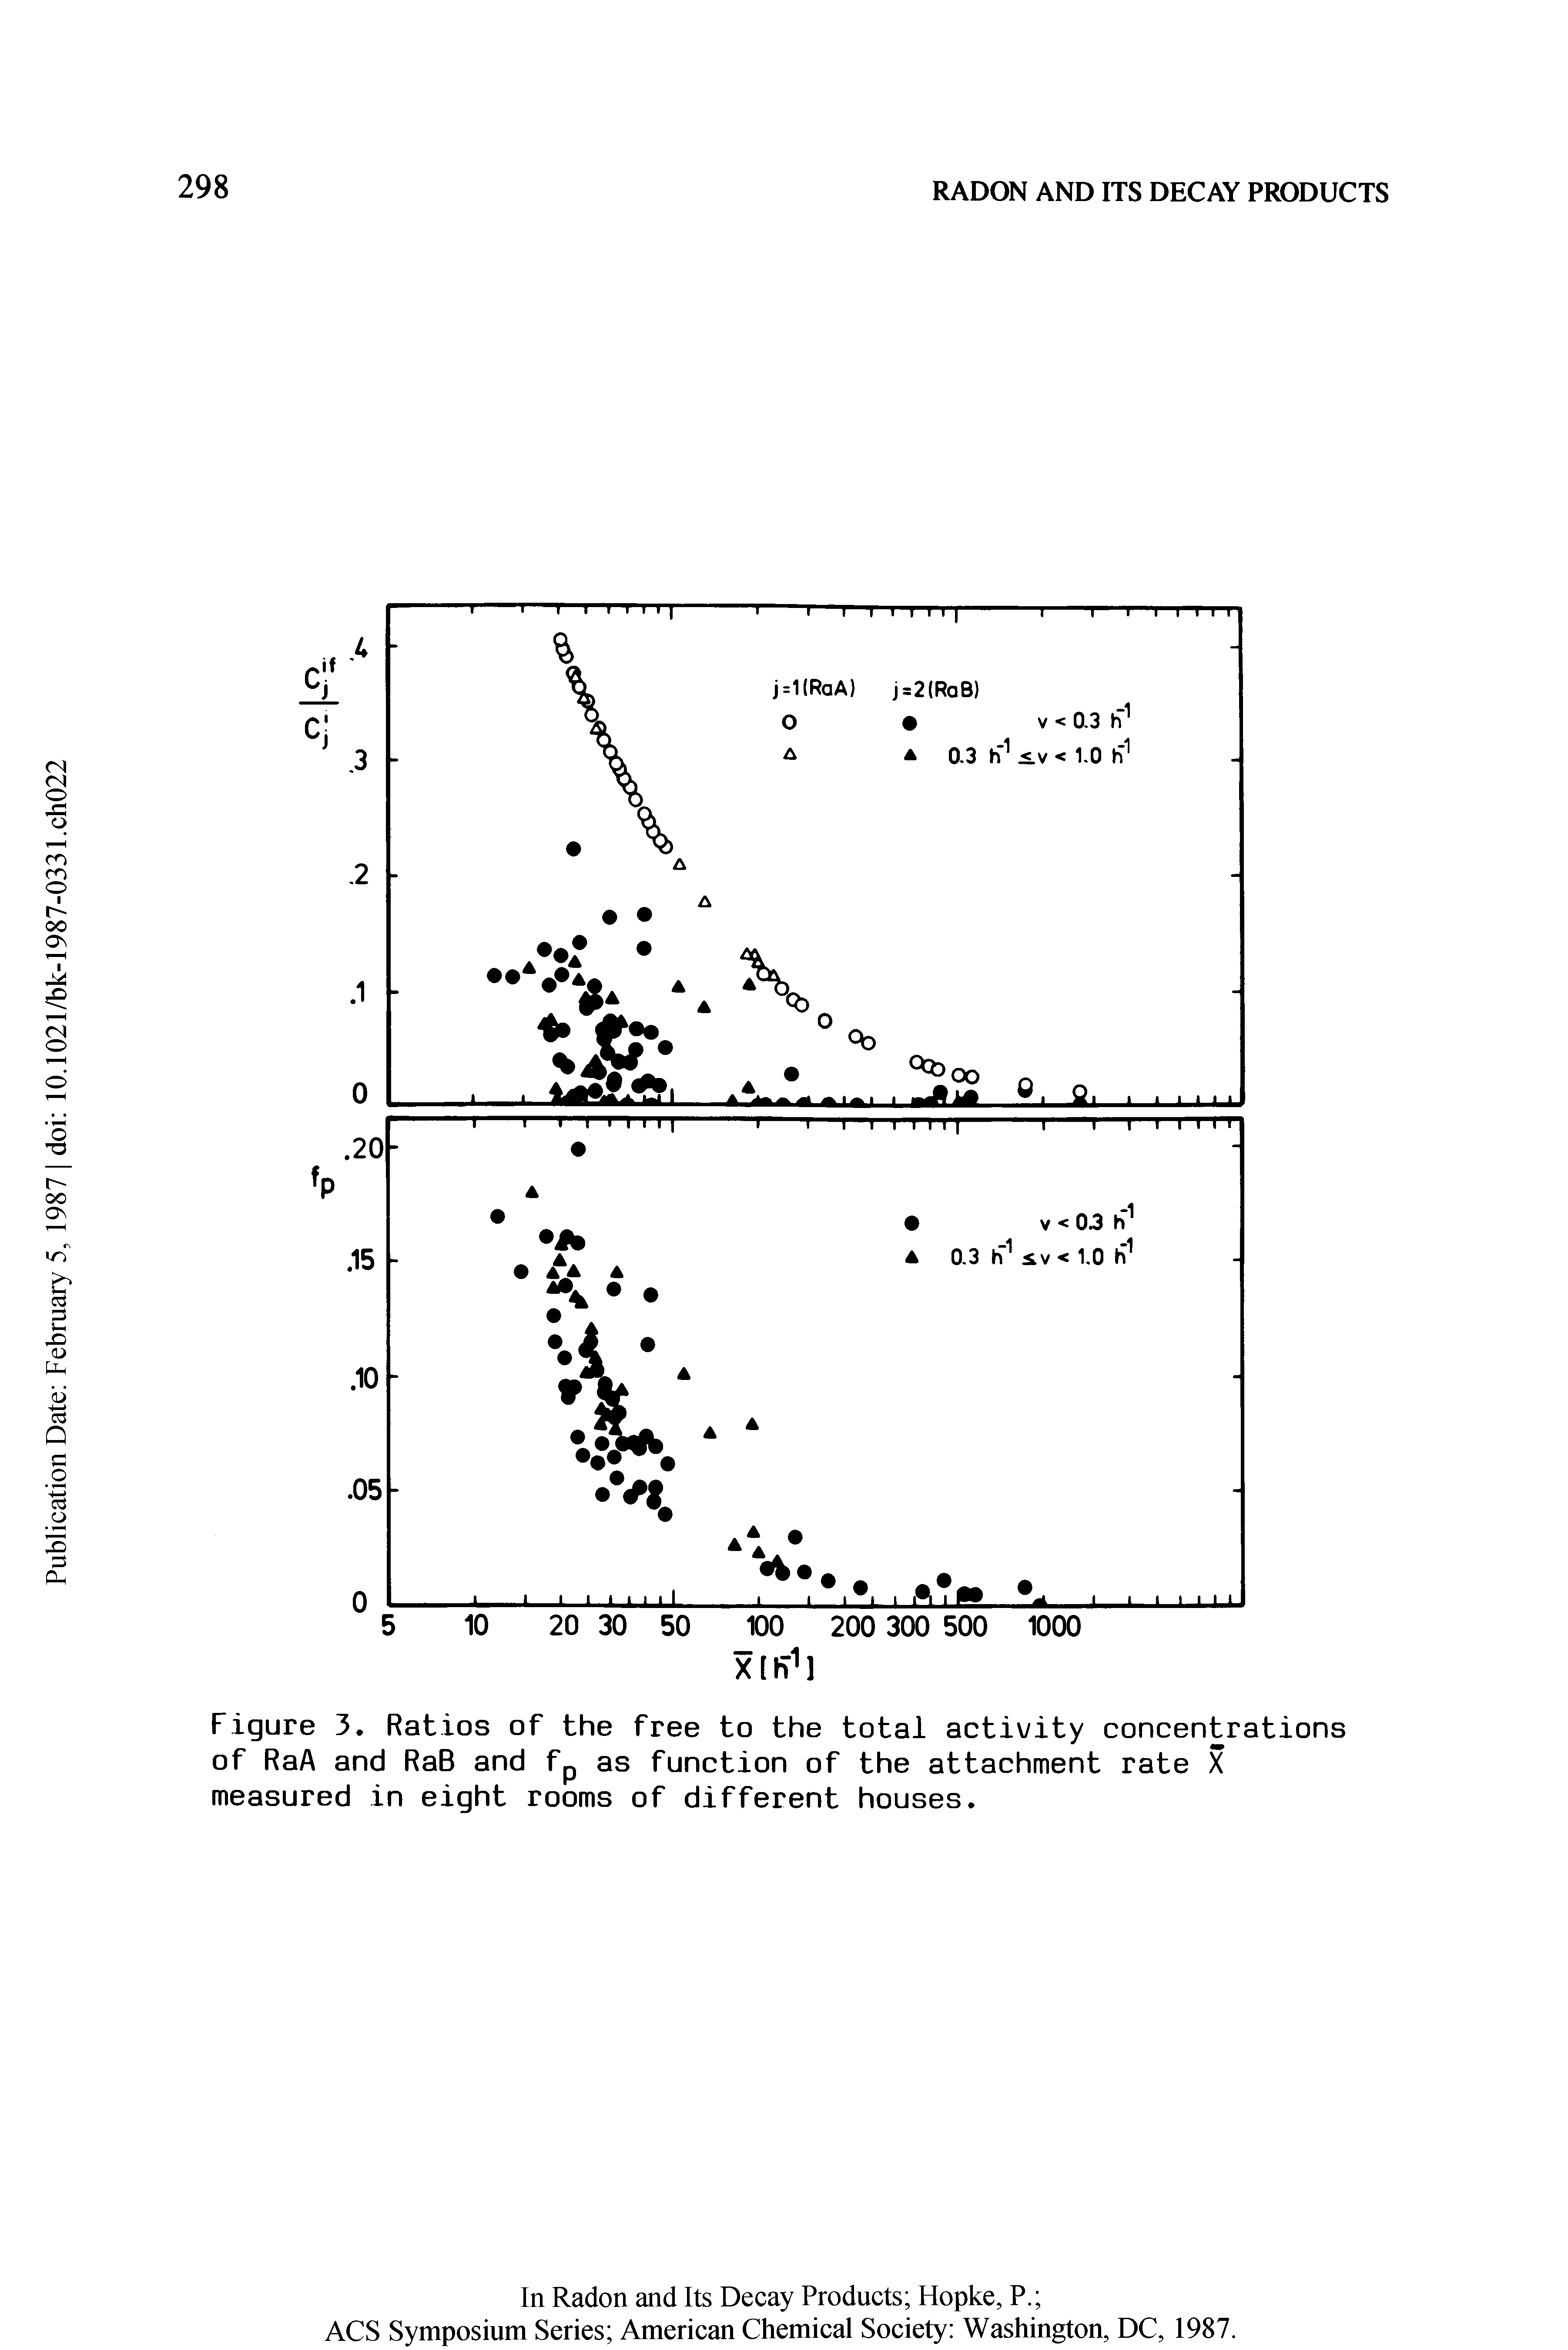 Figure 3. Ratios of the free to the total activity concentrations of RaA and RaB and fp as function of the attachment rate X measured in eight rooms of different houses.